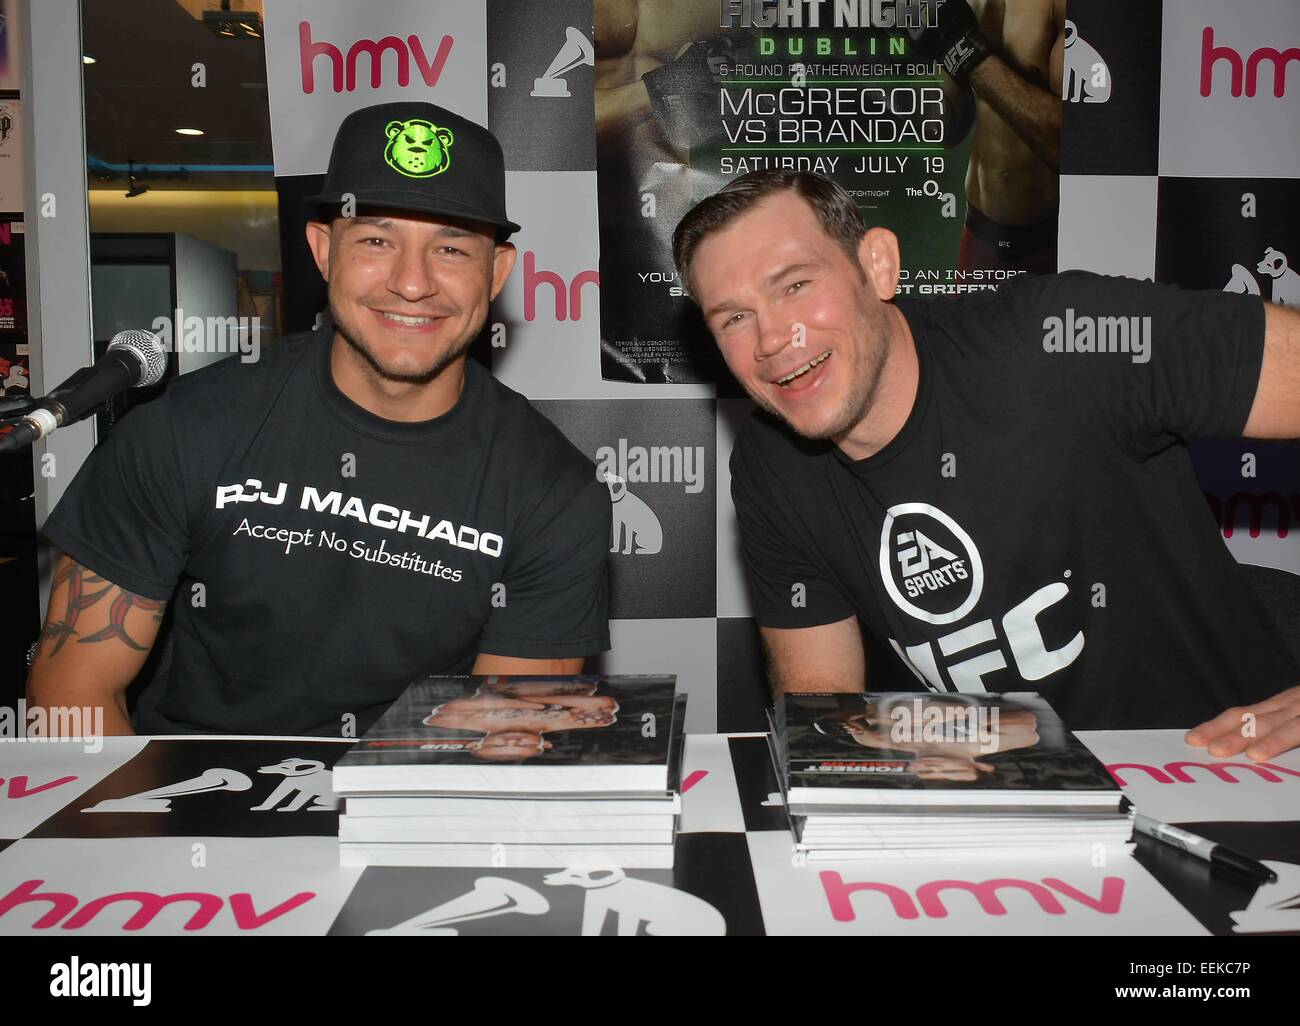 UFC fighters Cub Swanson & Forrest Griffin at a signing for fans at HMV Grafton Street, Dublin, Ireland - 17.07.14.  Featuring: Cub Swanson,Forrest Griffin Where: Dublin, Ireland When: 17 Jul 2014 Stock Photo